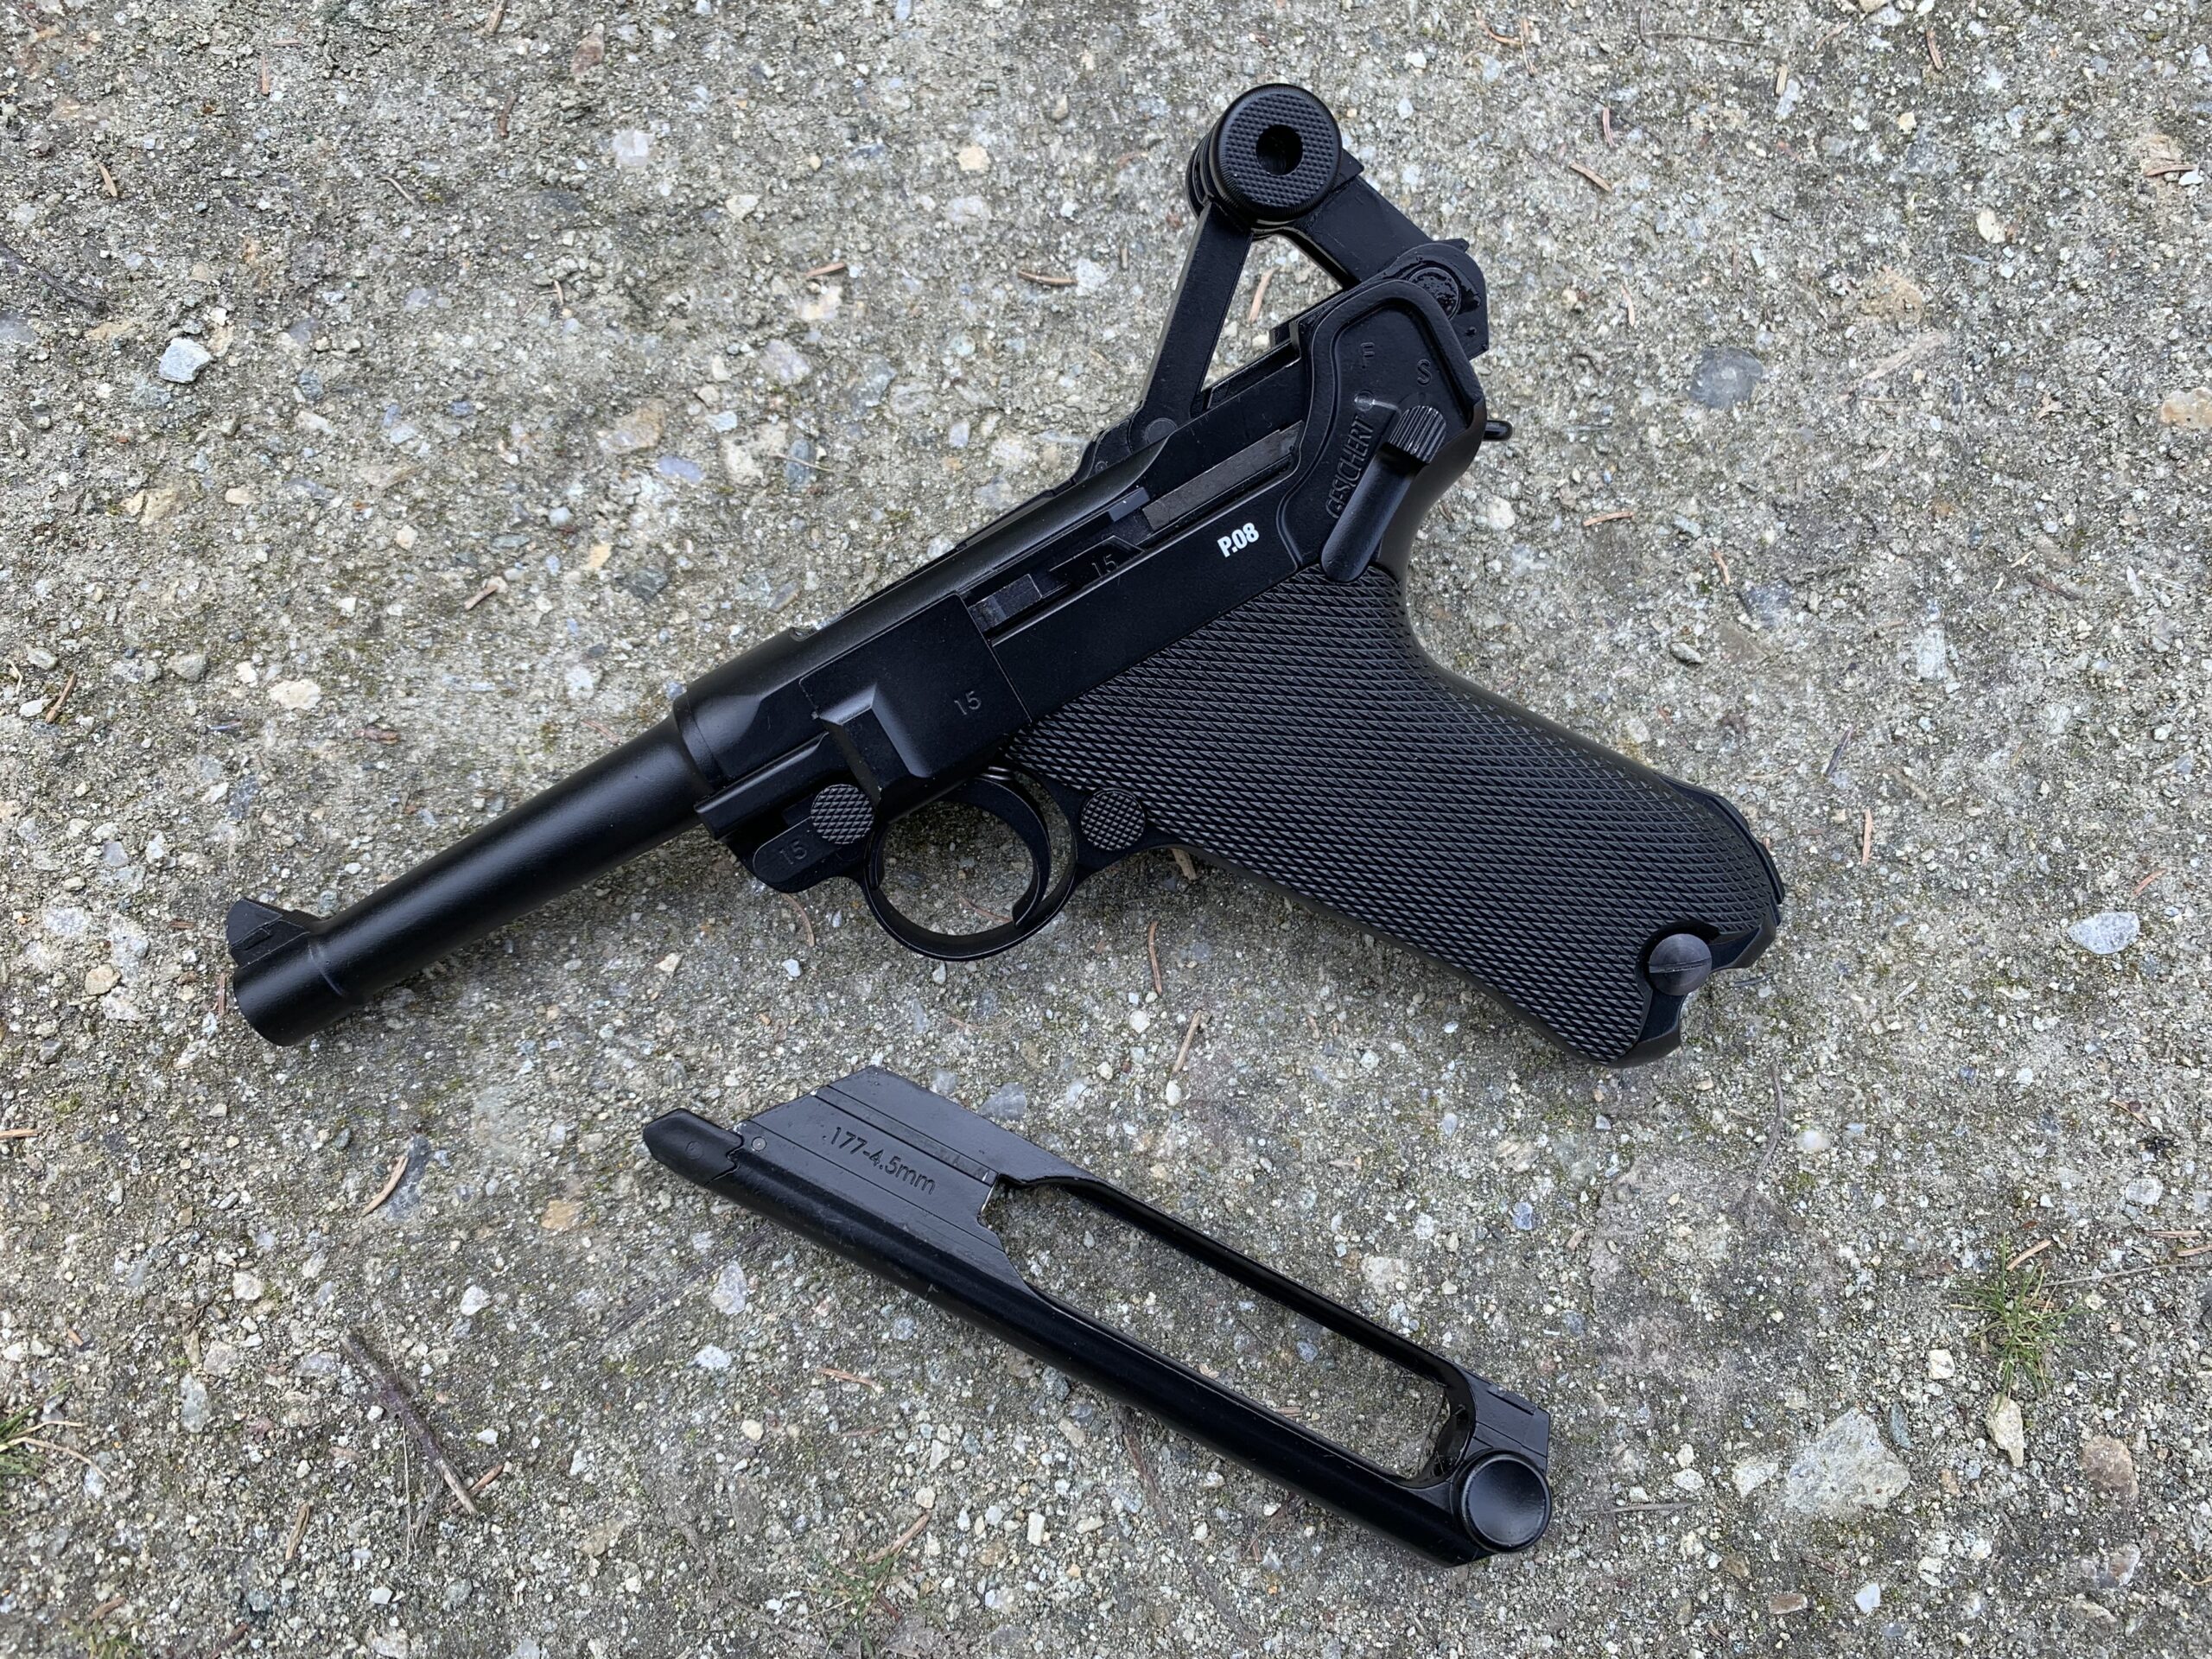 The Umarex Luger bb gun with the action open